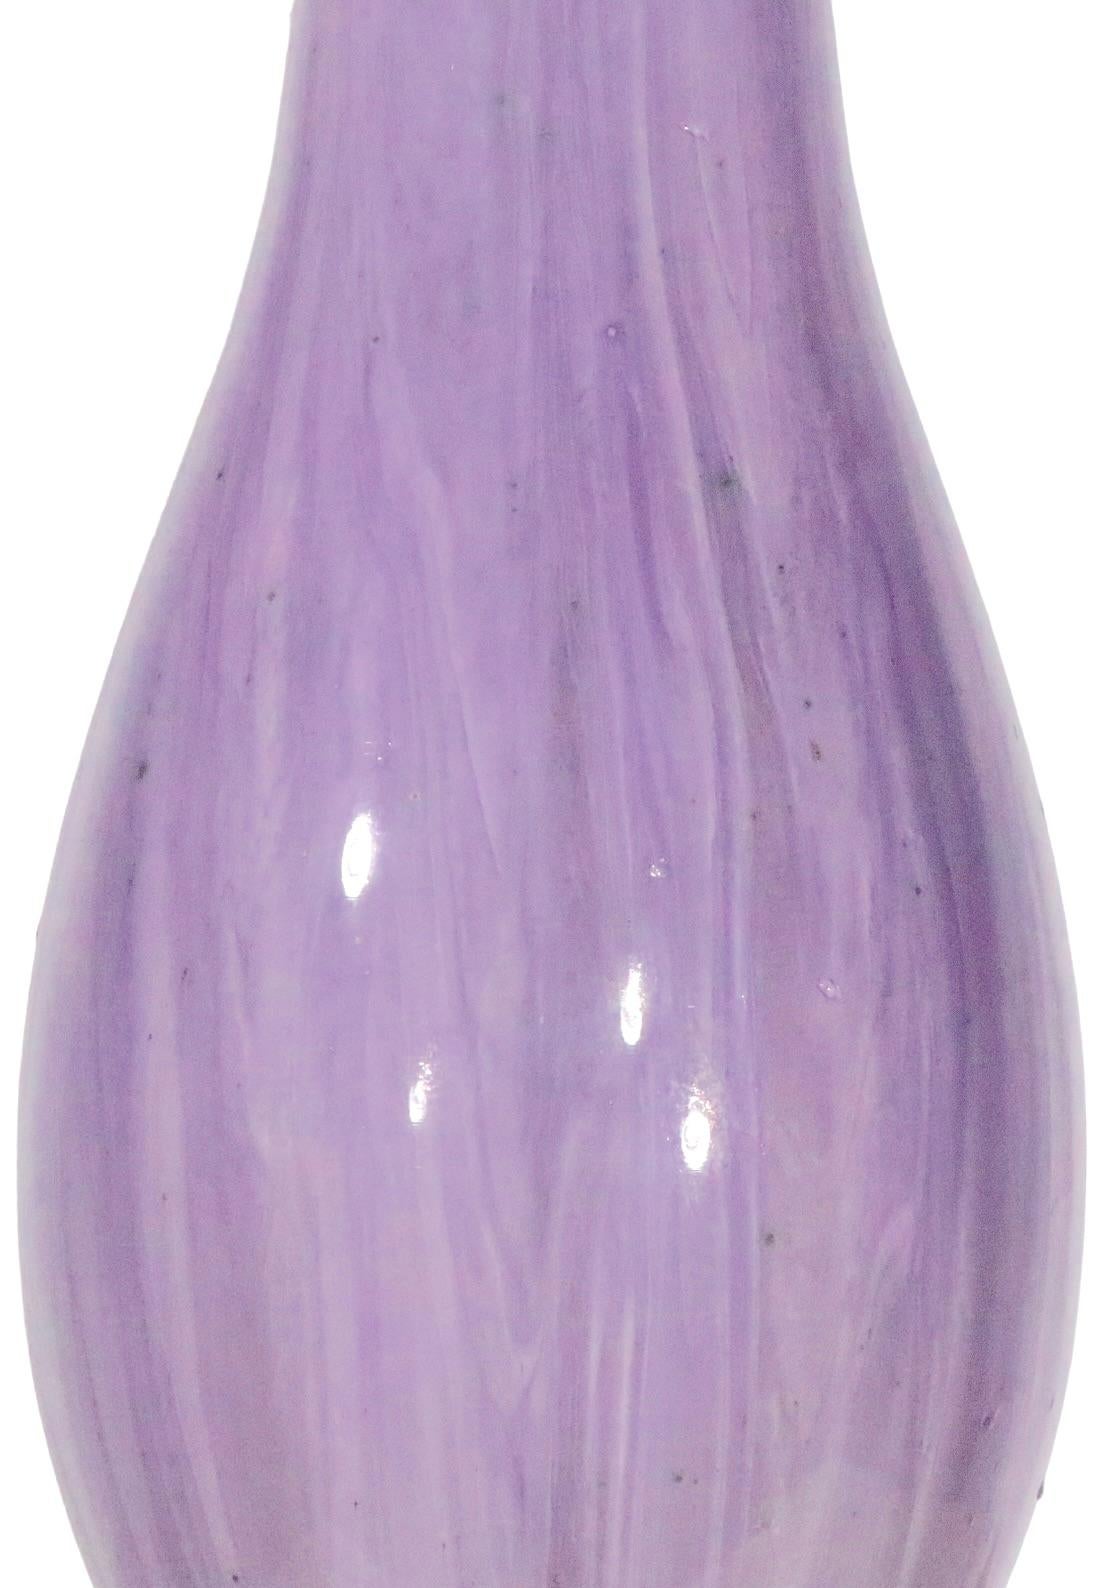 Large Murano Glass Table Lamp in Lavender Glass, circa 1950/1960s For Sale 6